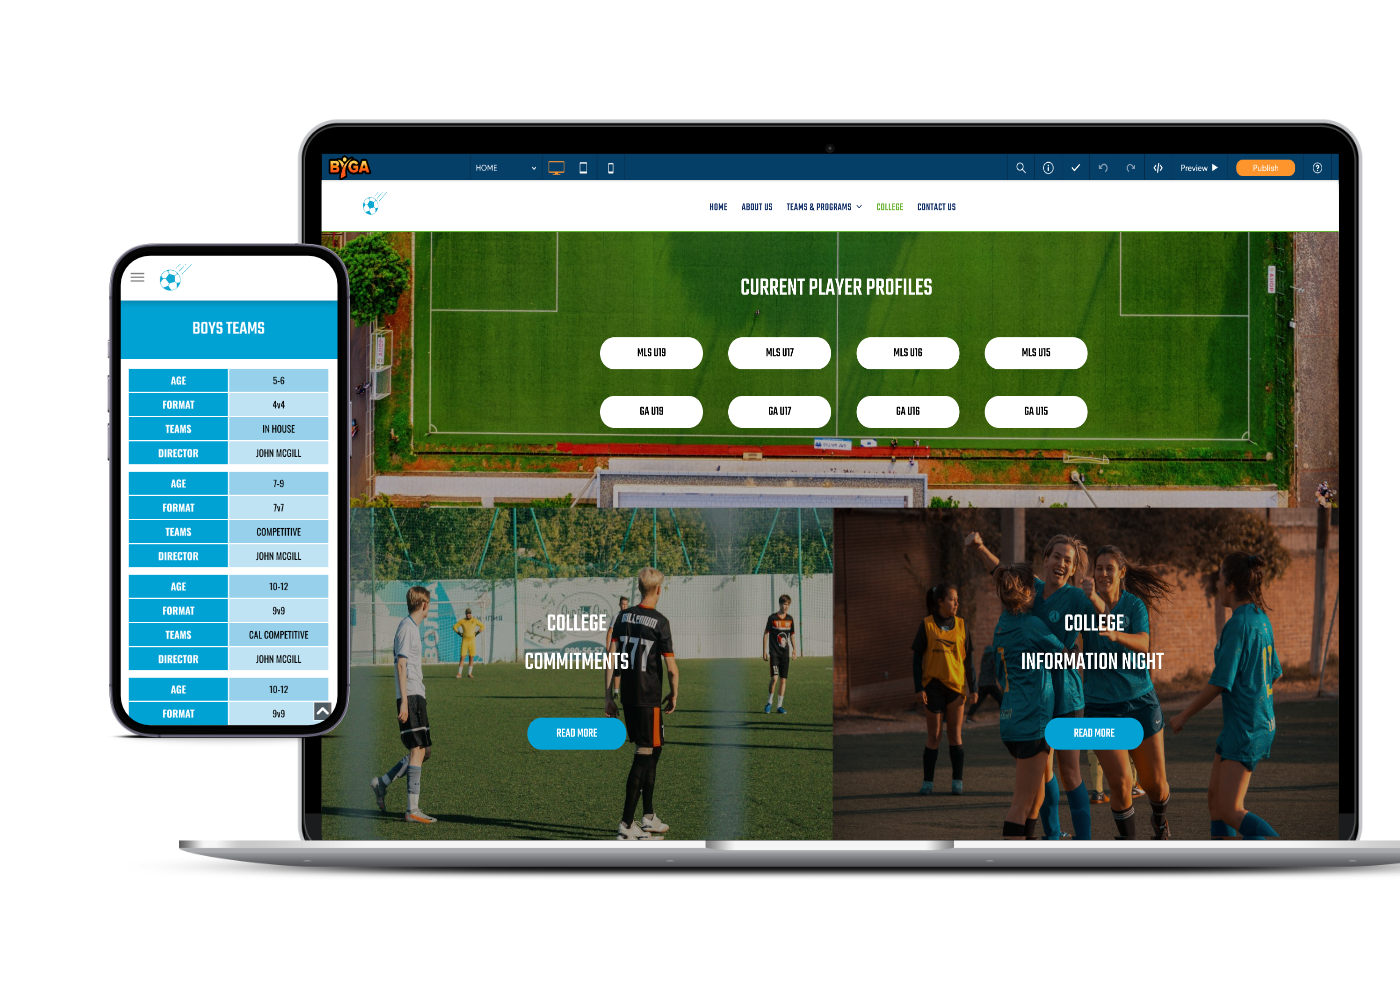 Byga youth sports club management laptop and tablet with tryouts form and player entries